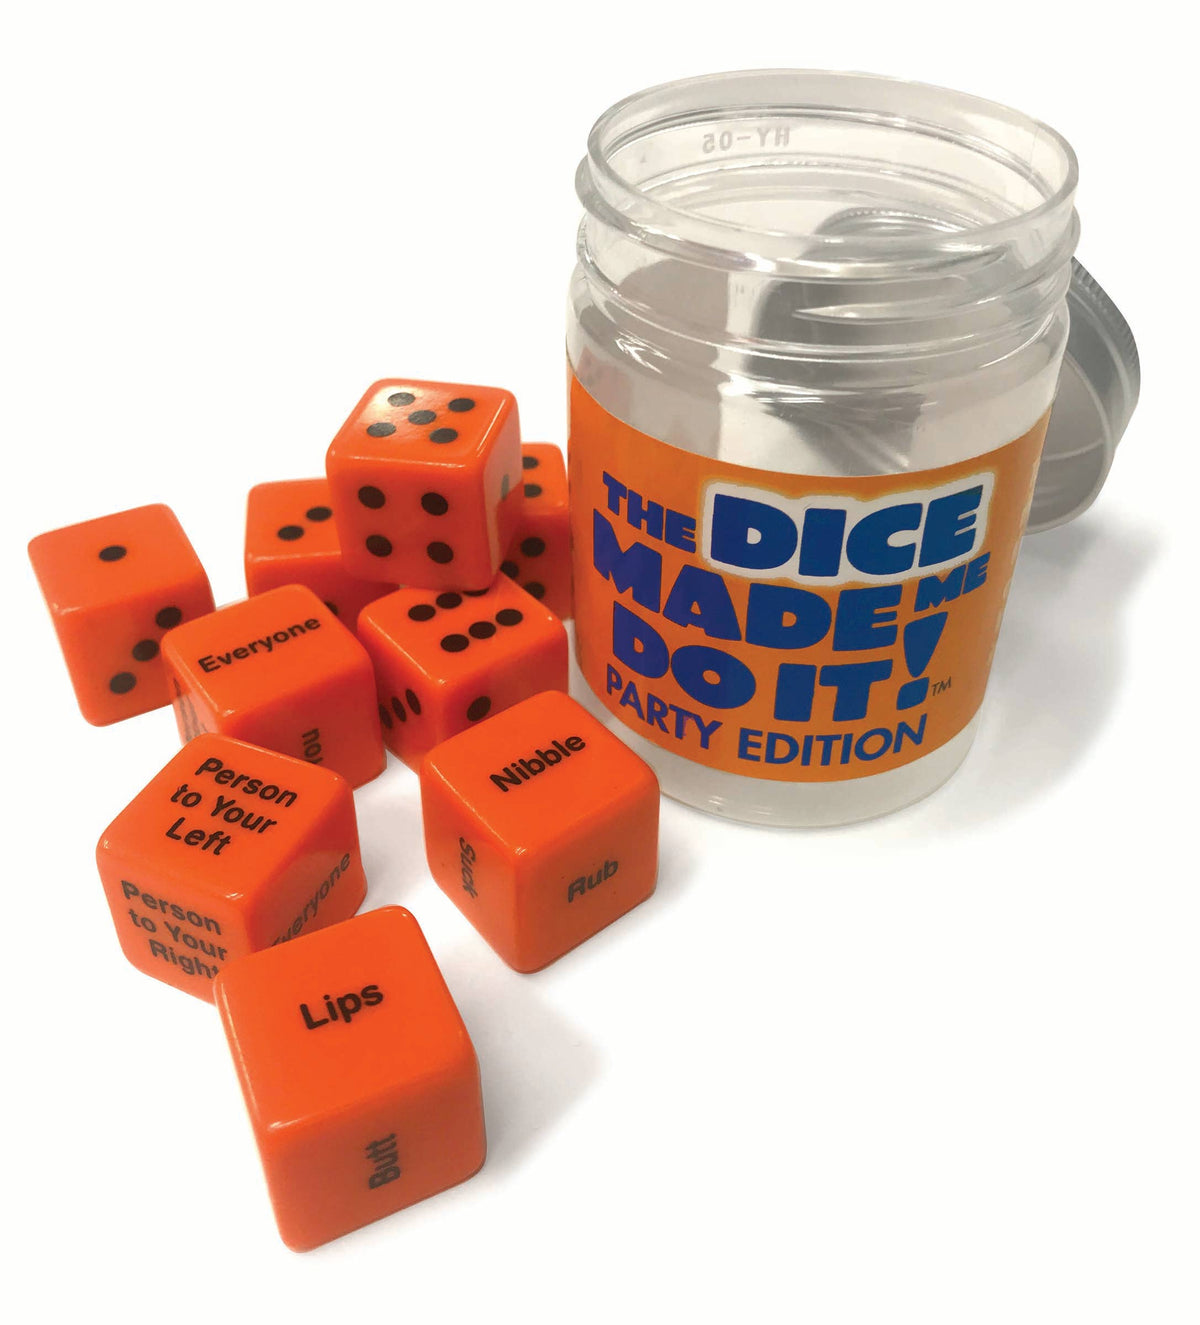 The Dice Made Me Do It! Party Dice game for Adults